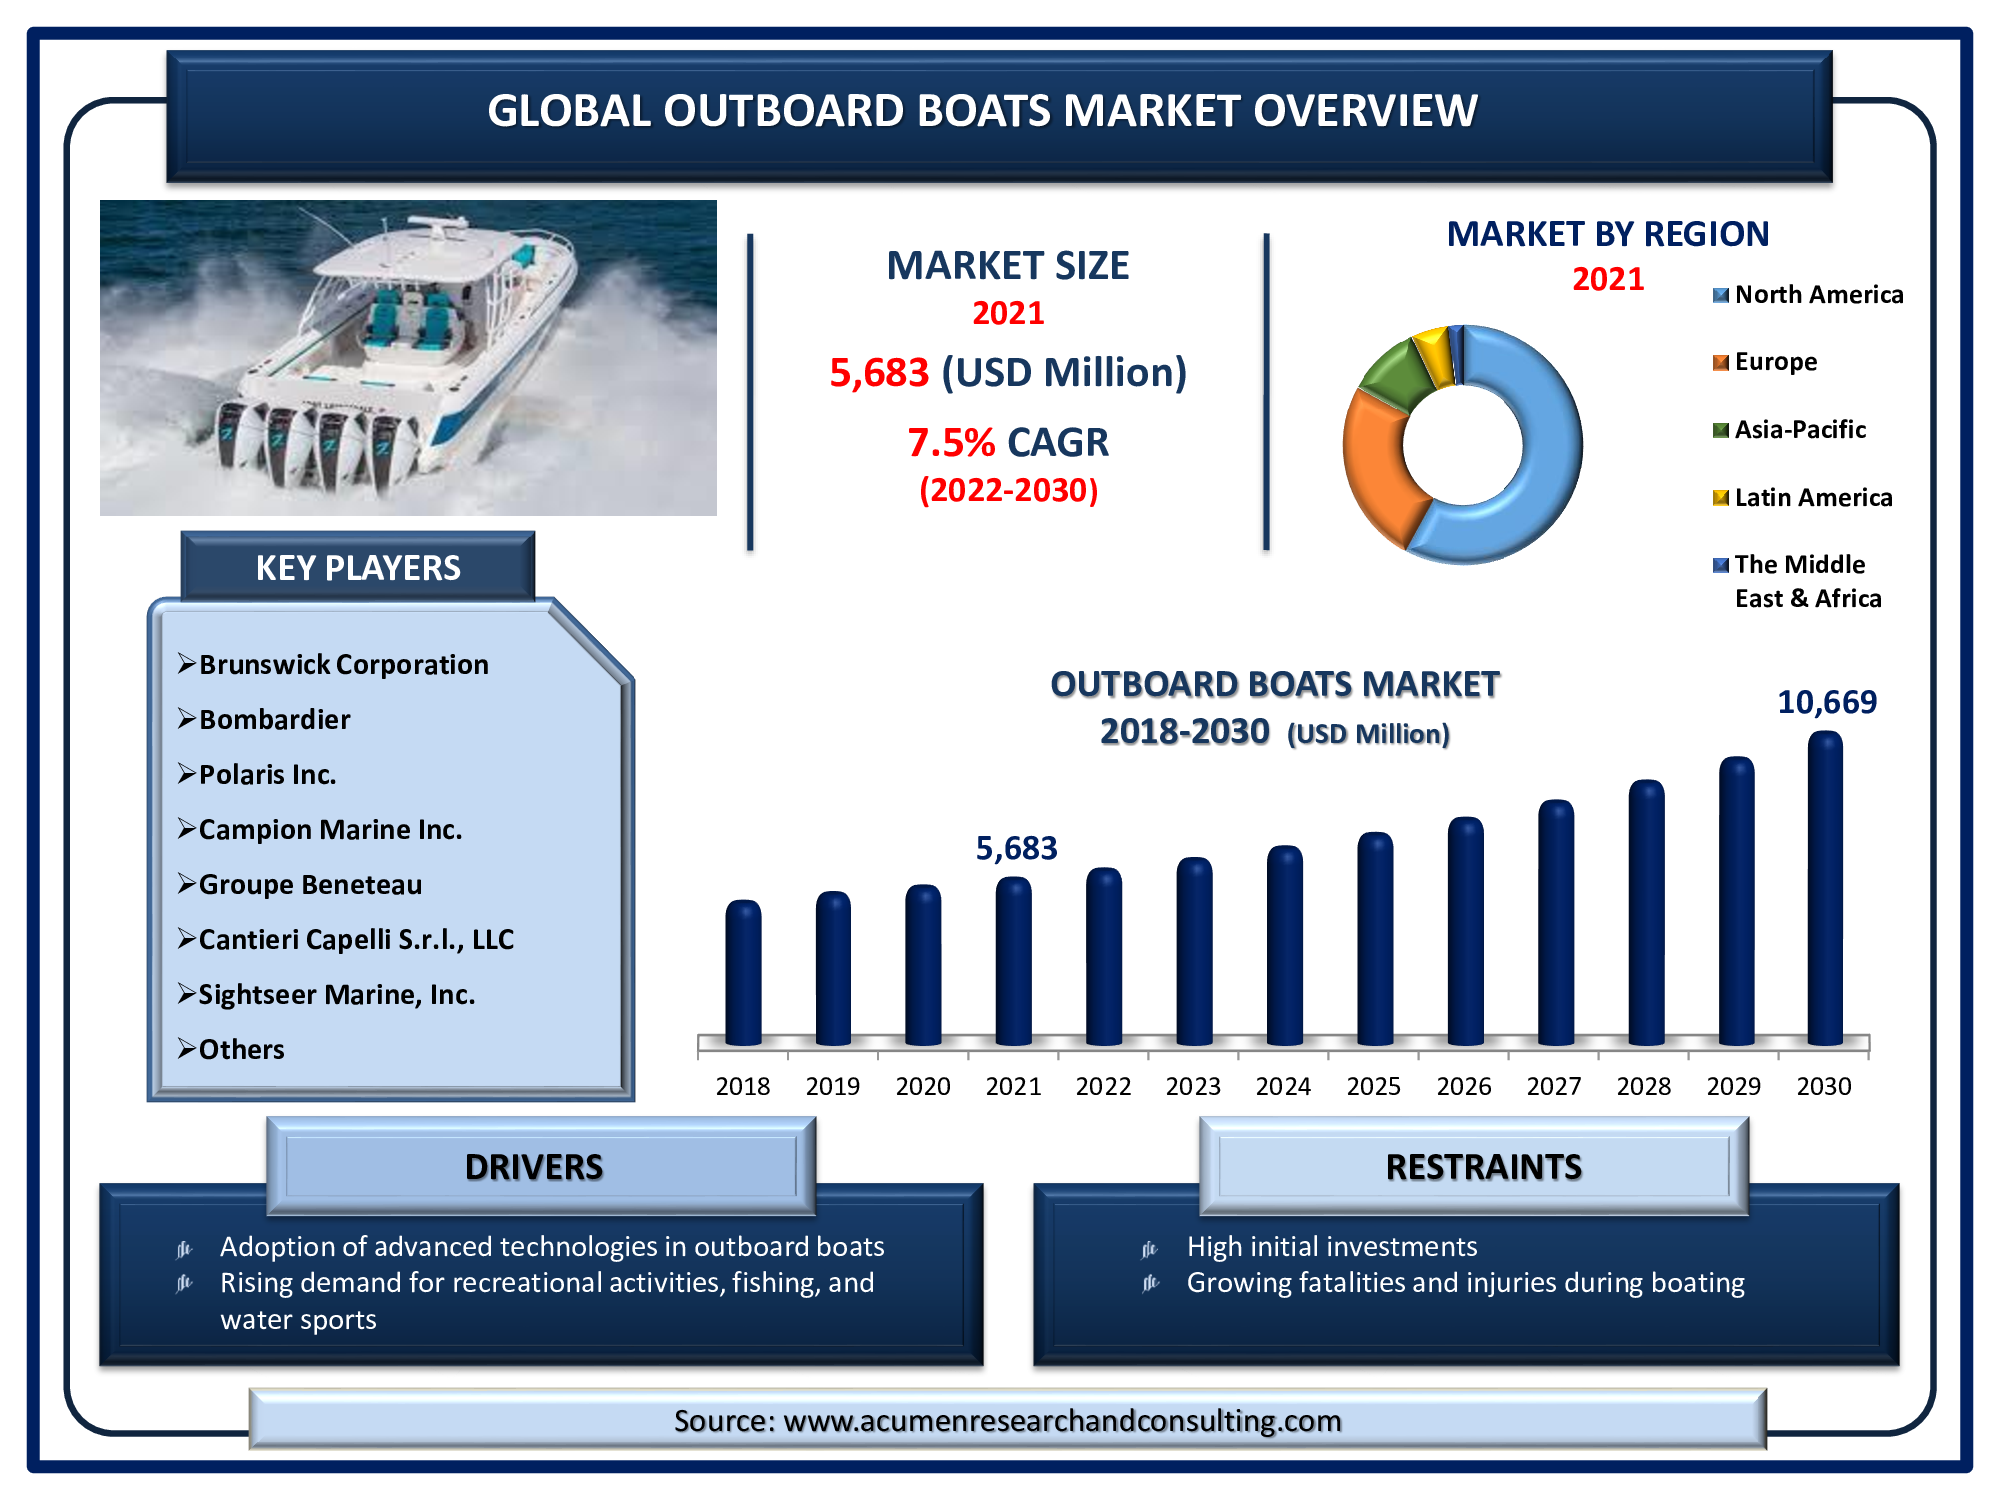 Key Drivers Outboard Boats